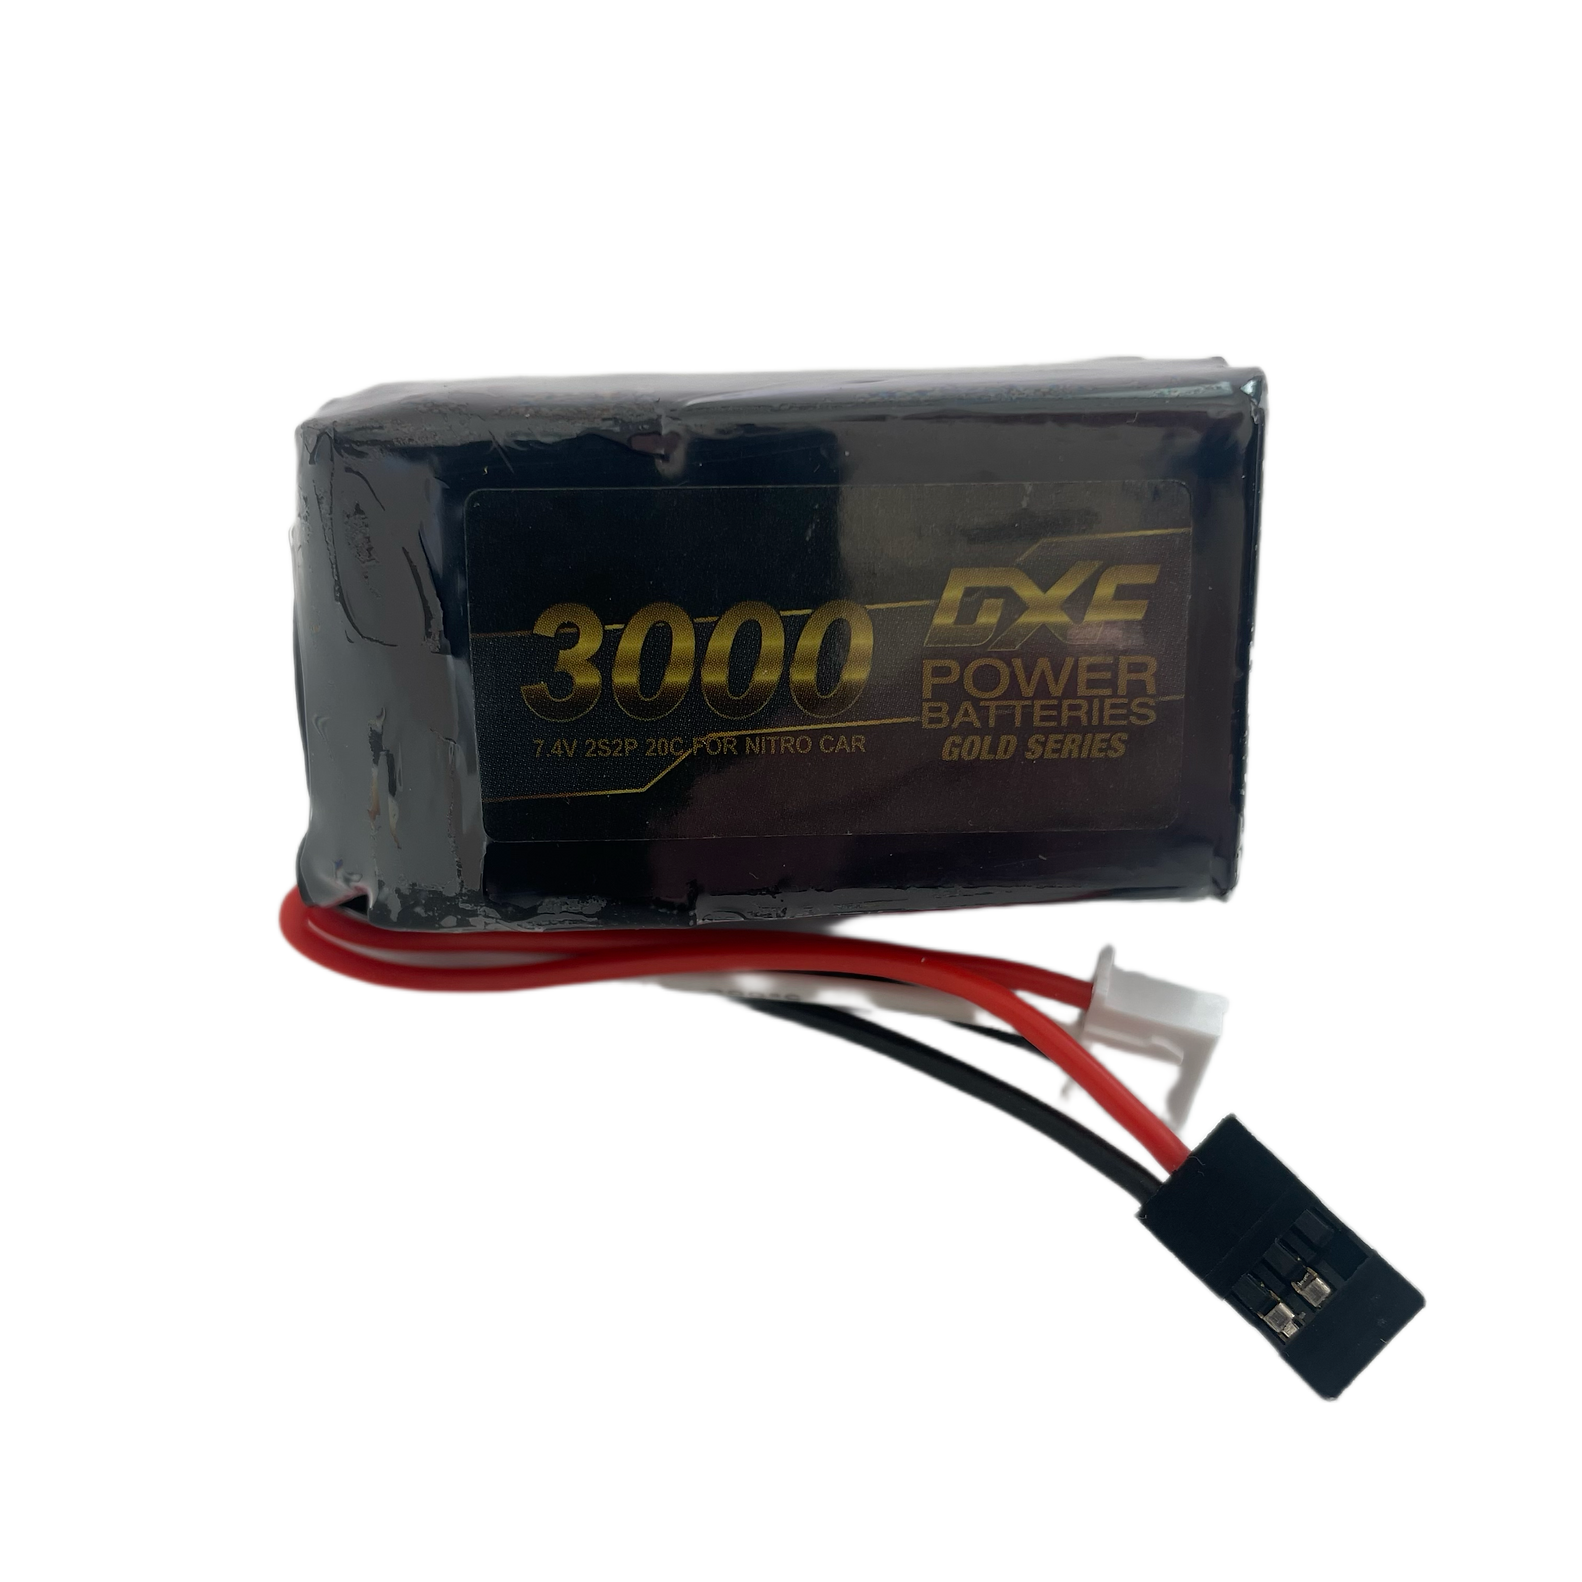 DXF Gold series 3000mah Receiver Pack (3000-2s-GTR) - [Sunshine-Coast] - DXF Power - [RC-Car] - [Scale-Model]